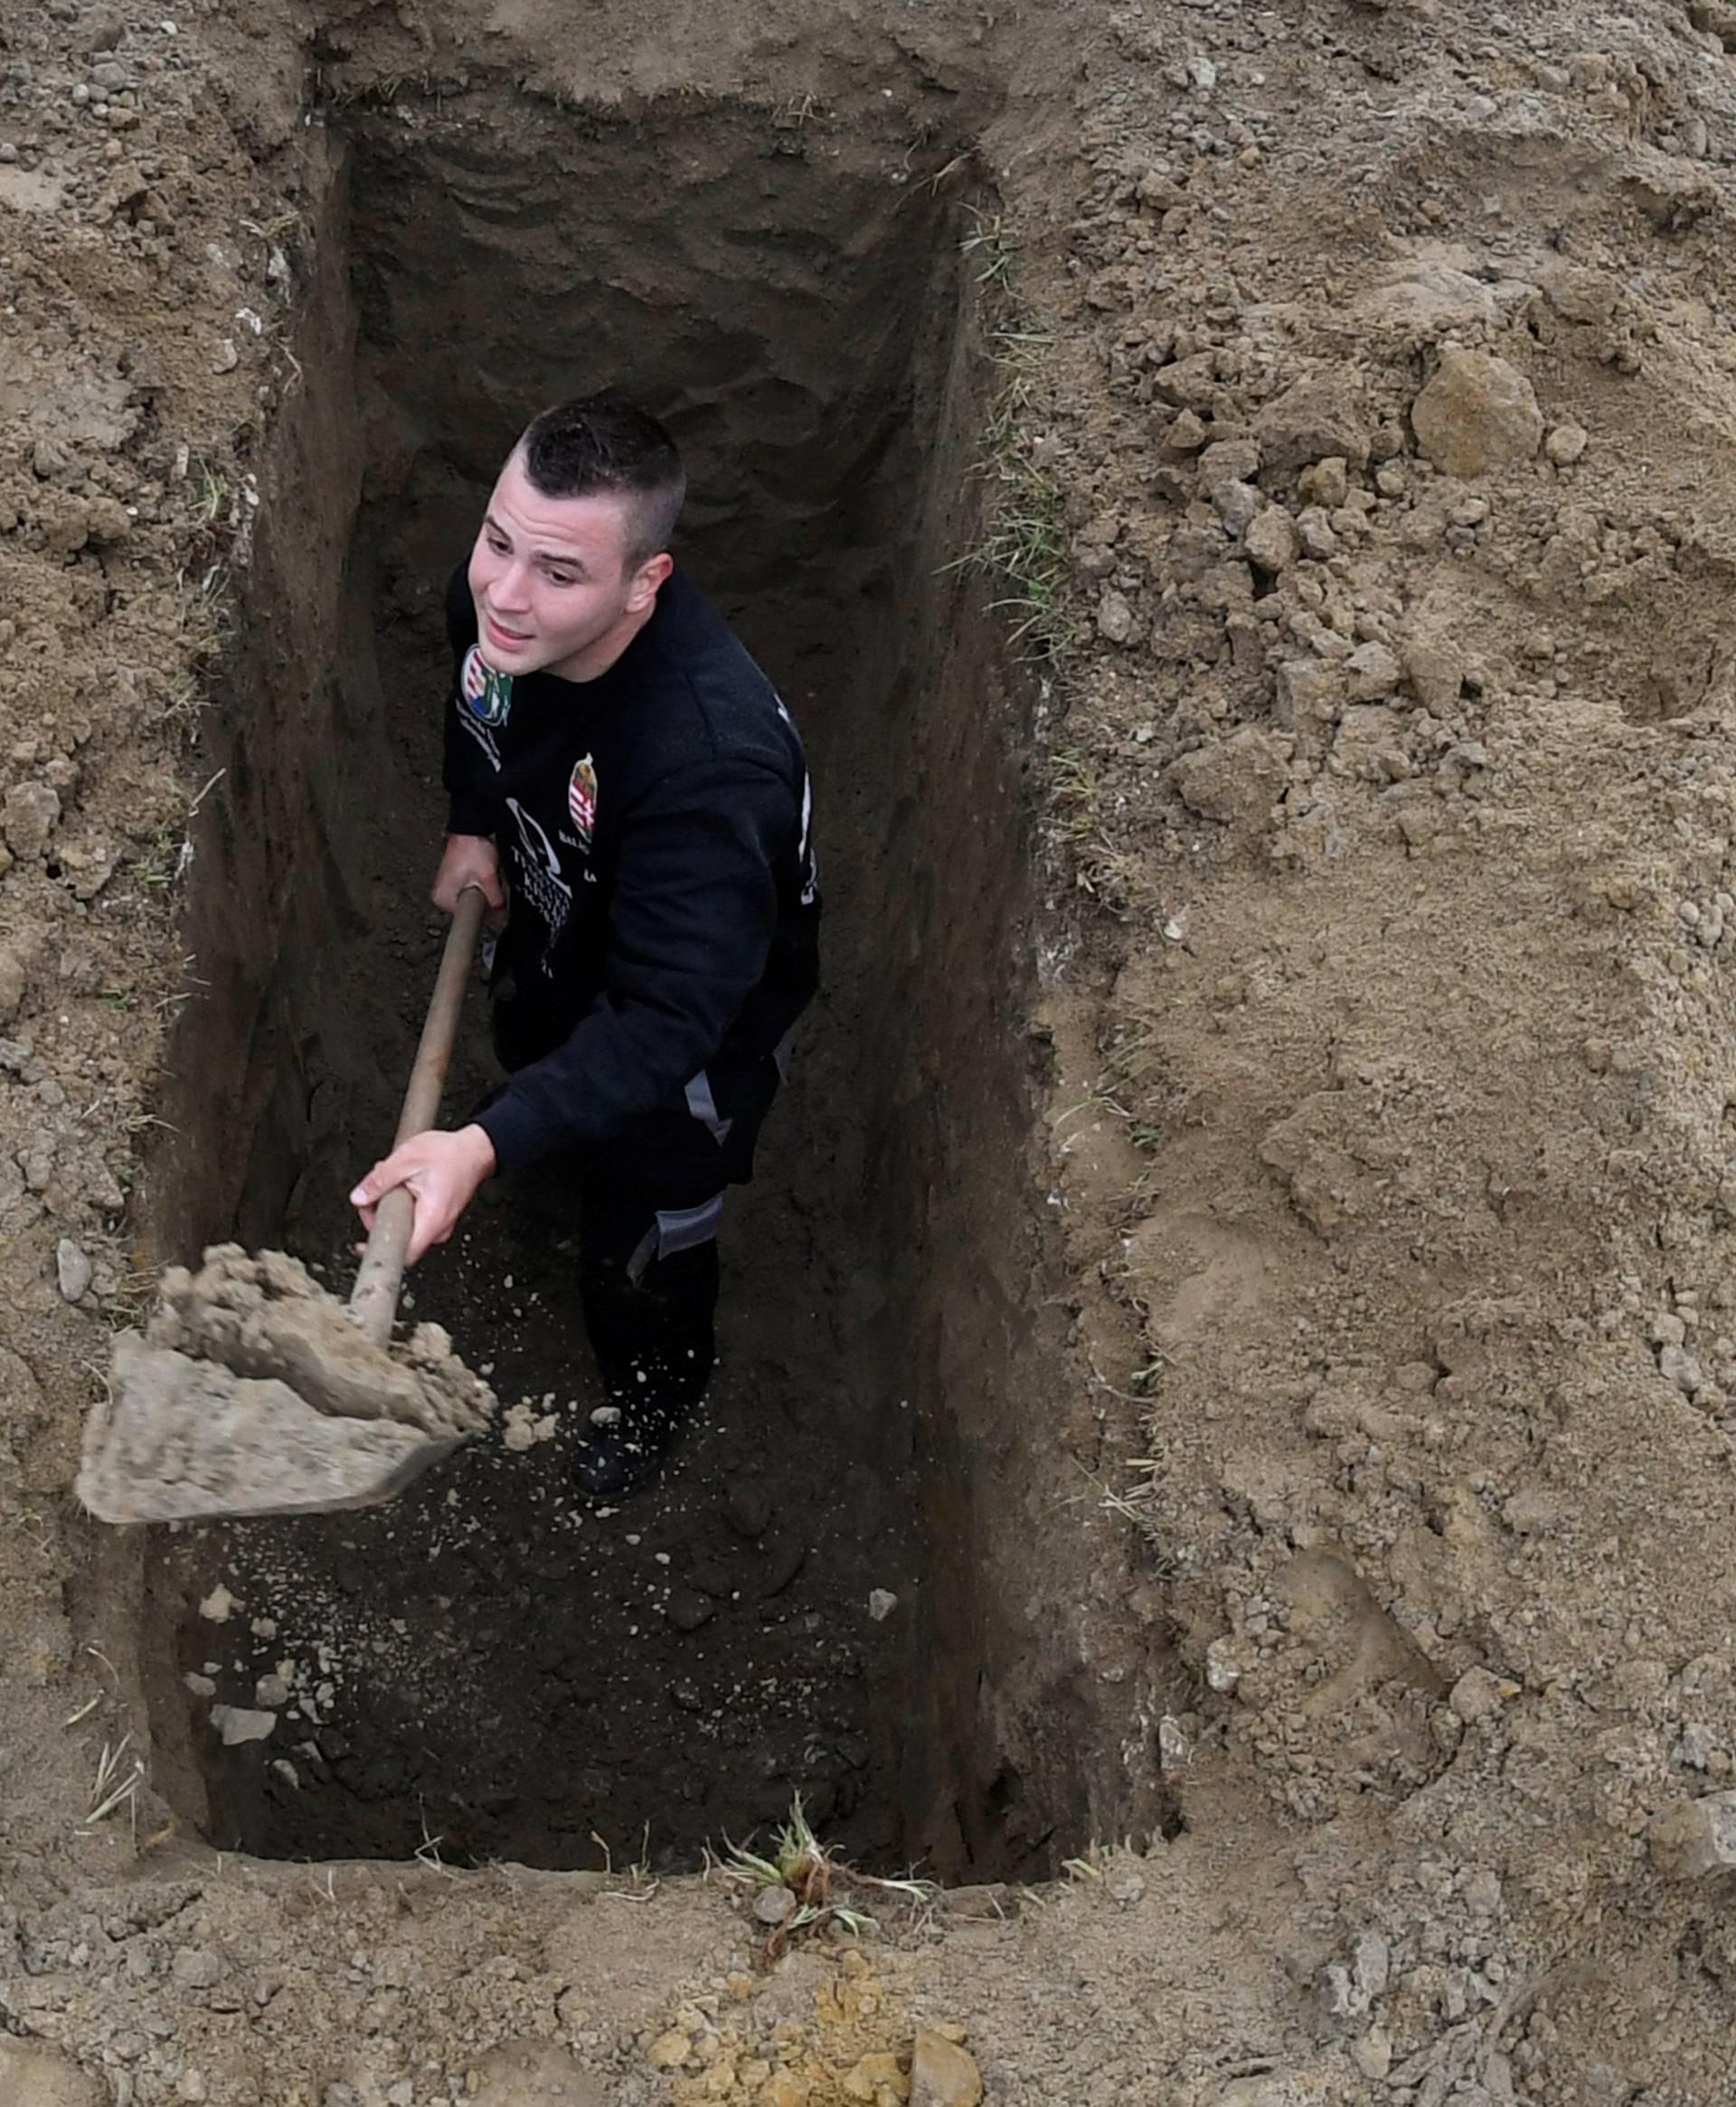 A gravedigger competes during a grave digging championship in Trencin, Slovakia